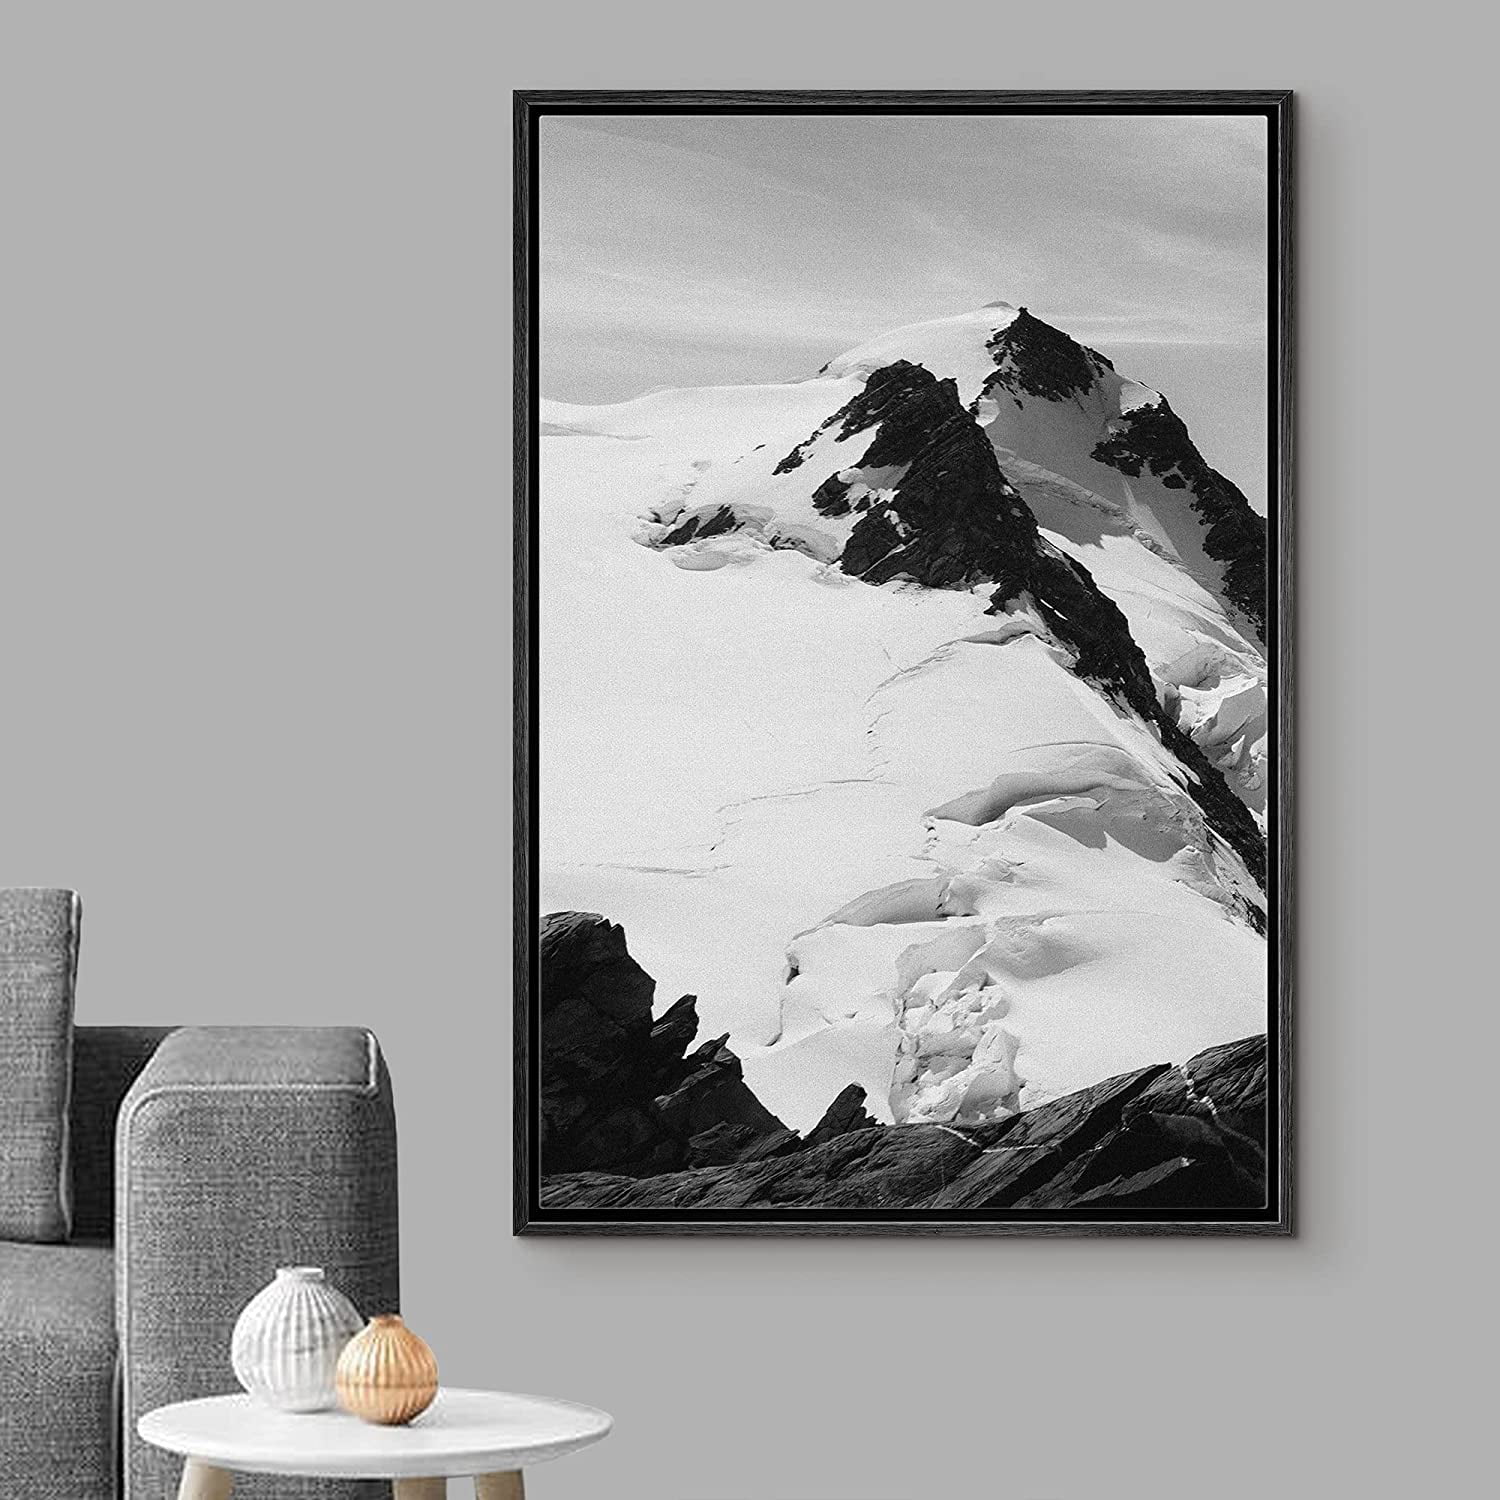 16x24 Bedroom Office wall26 Canvas Print Wall Art Gray Zen Garden with Massage Stones & Cherry Blossoms Nature Wilderness Photography Realism Chic Scenic Relax/Calm Multicolor for Living Room